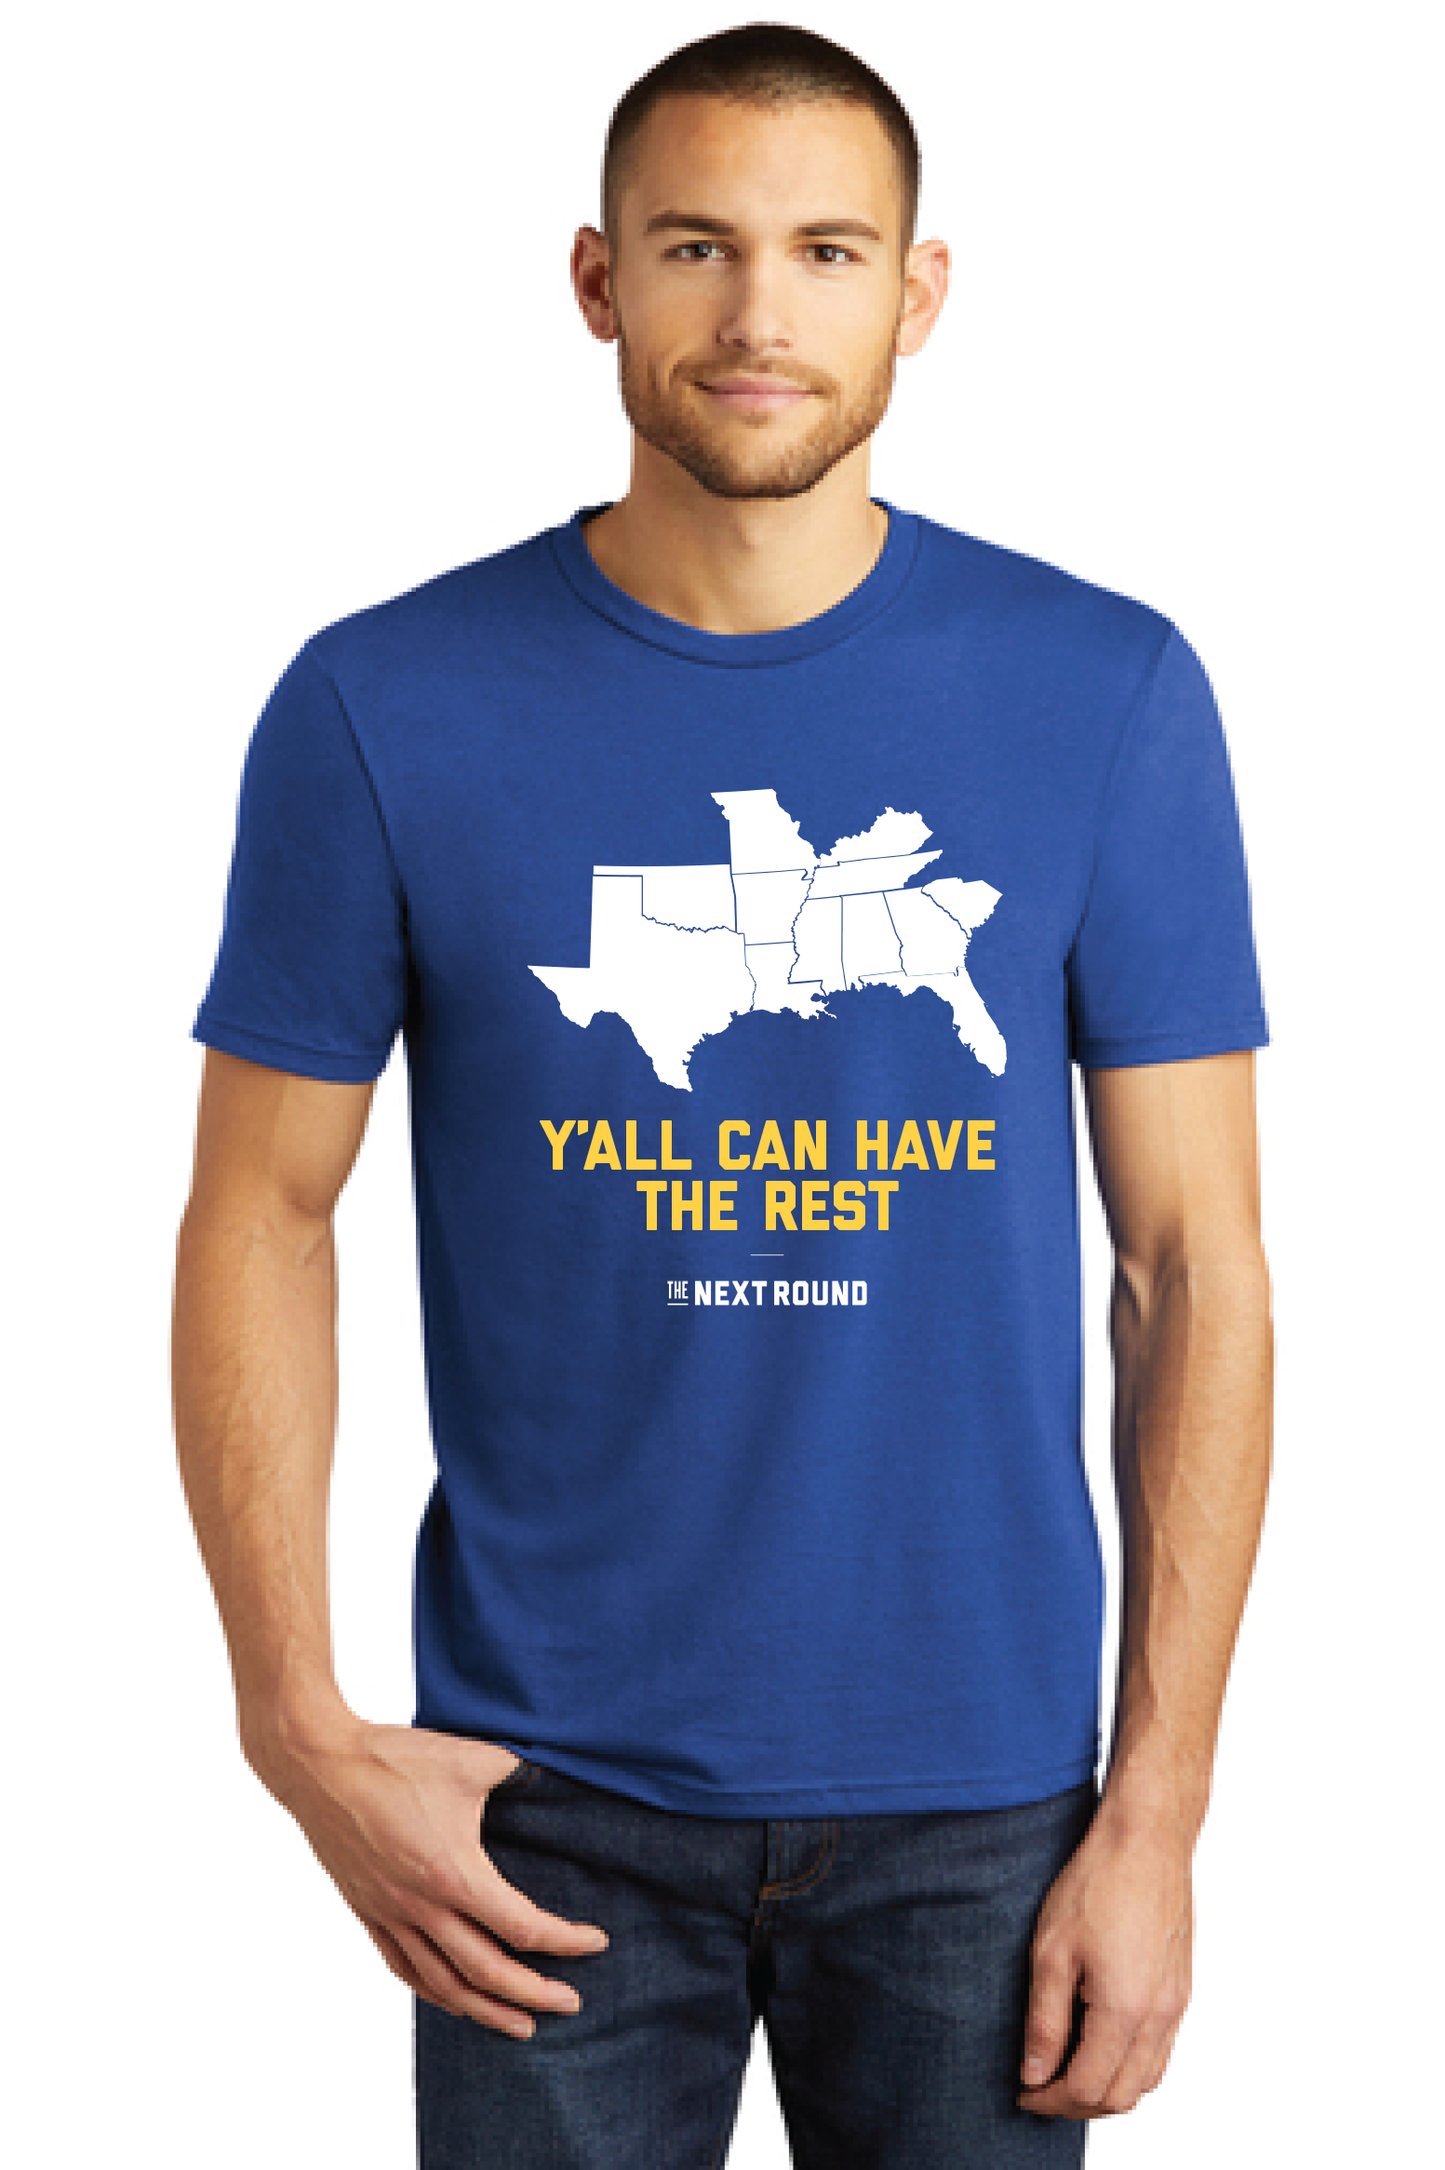 "Y'all Can Have The Rest" Shirt